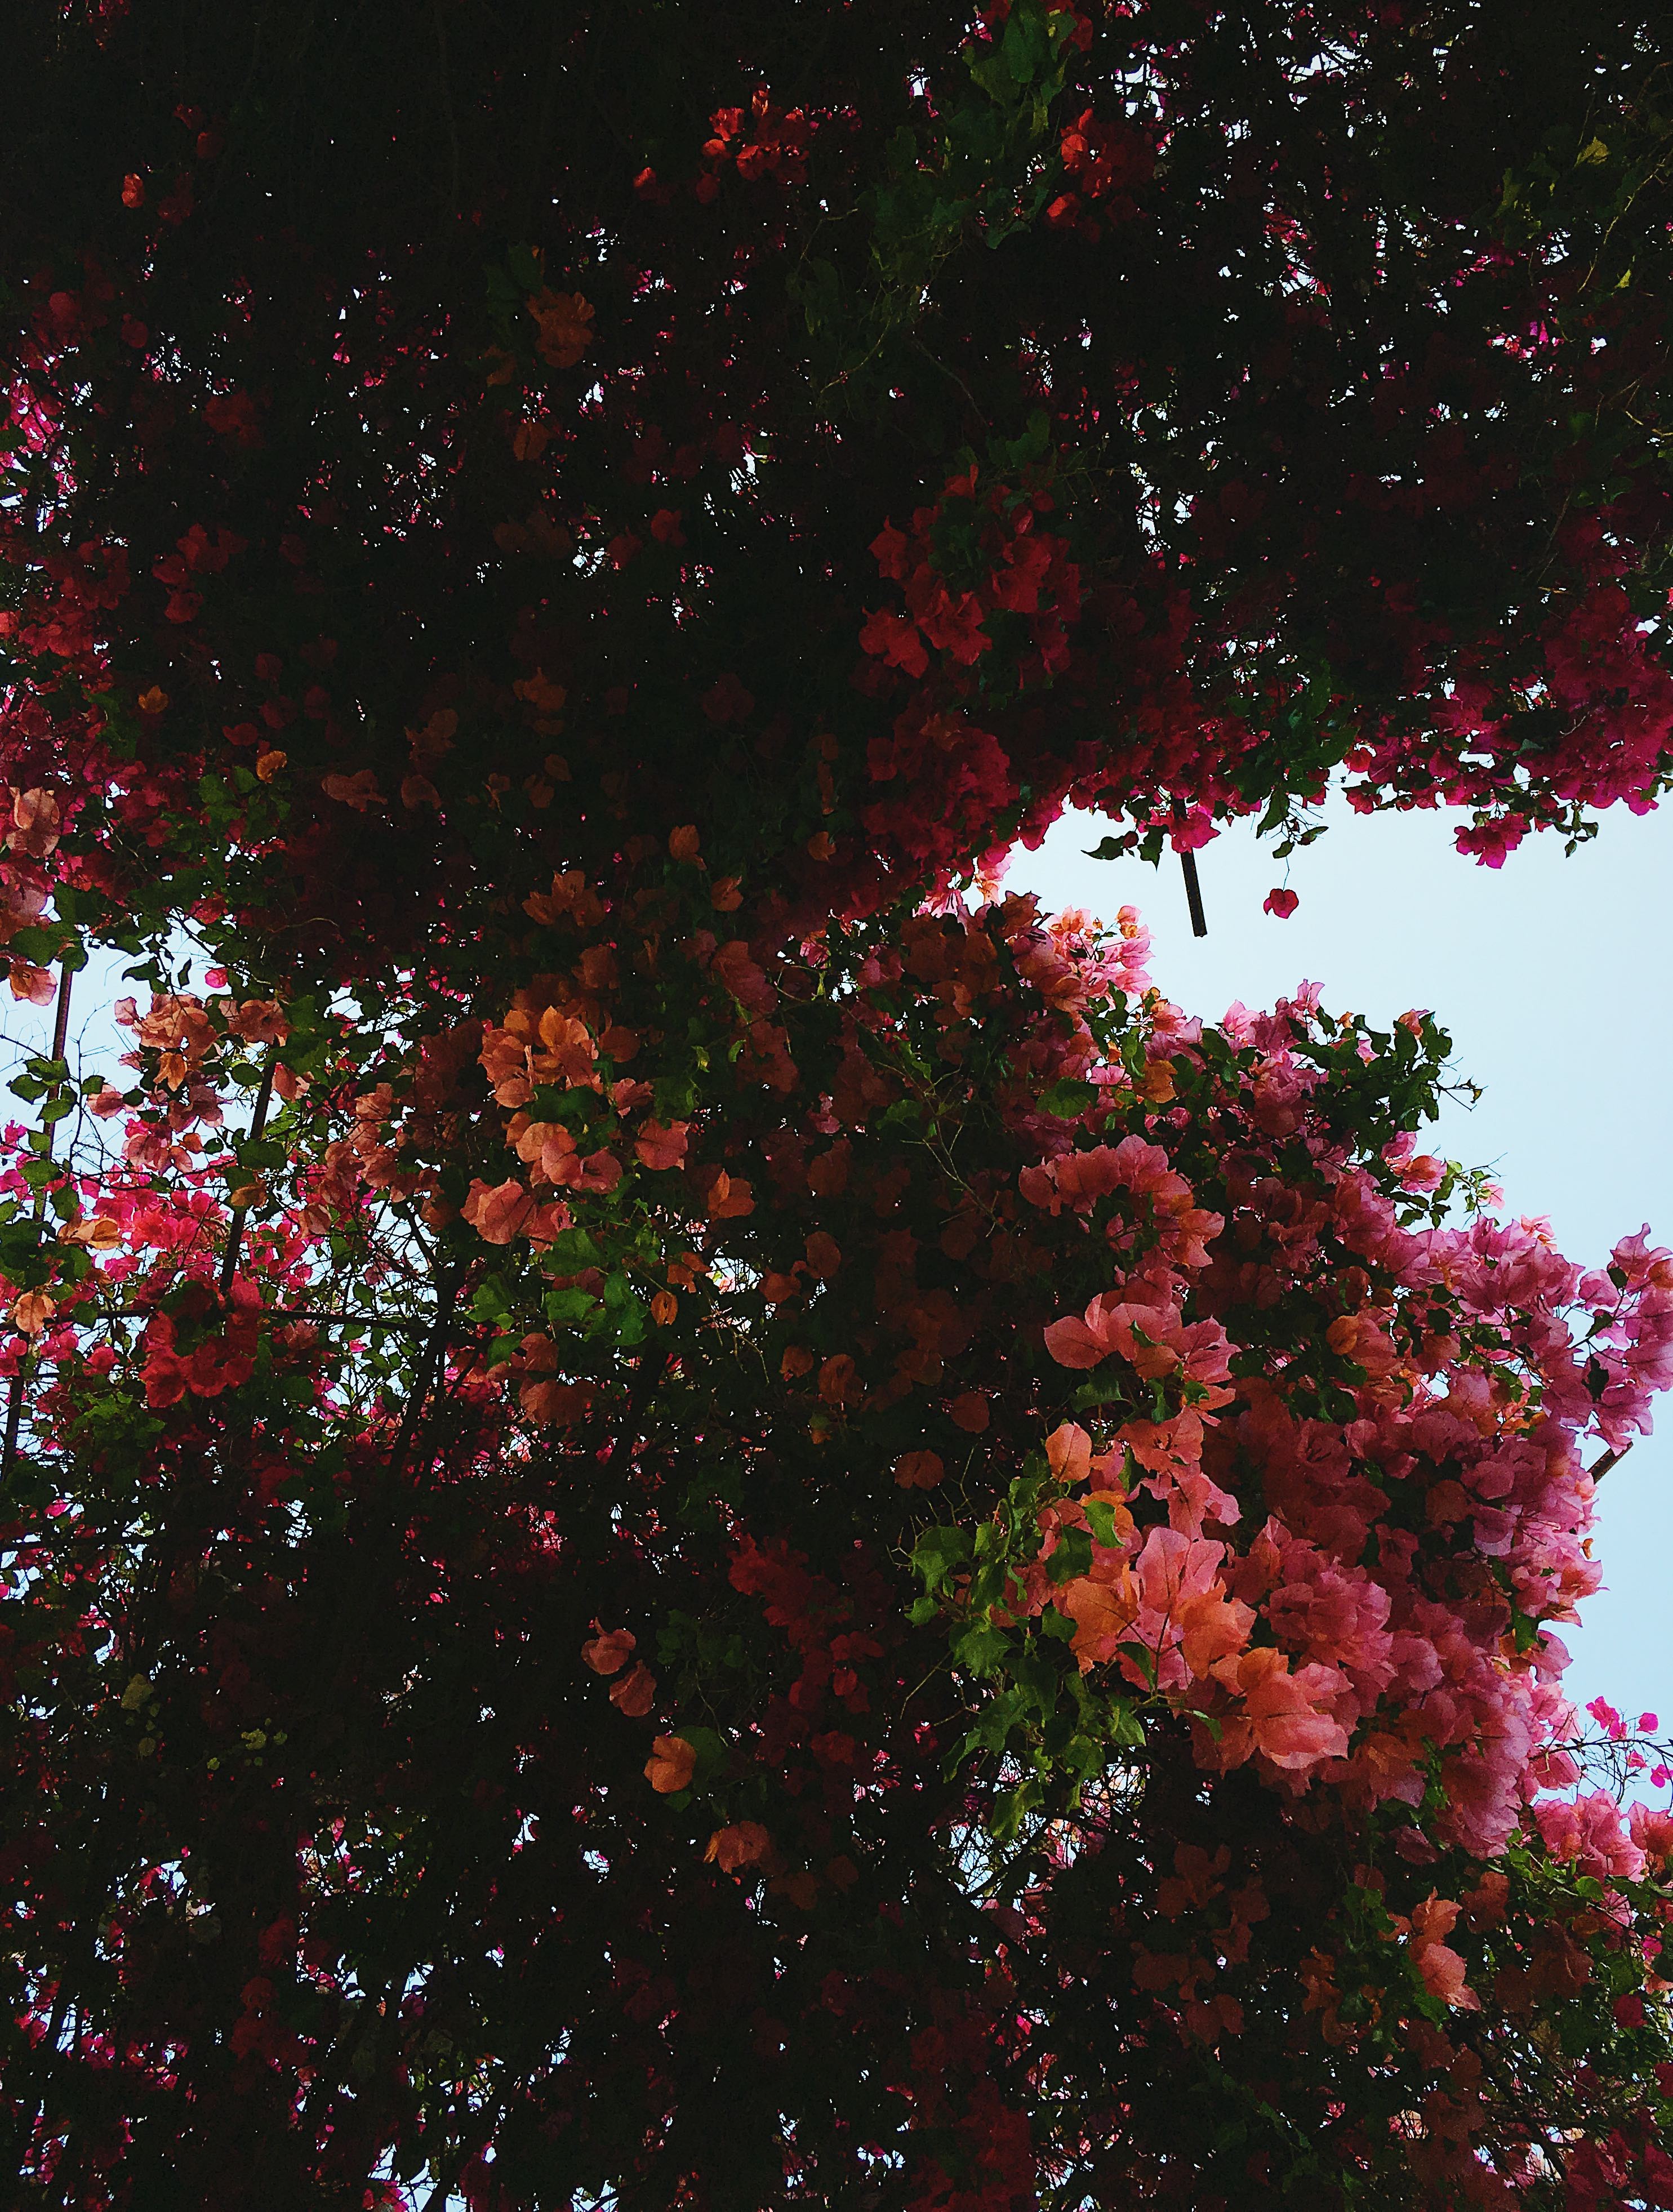 getty museum-flowertree-LCM-LiveClothesMinded